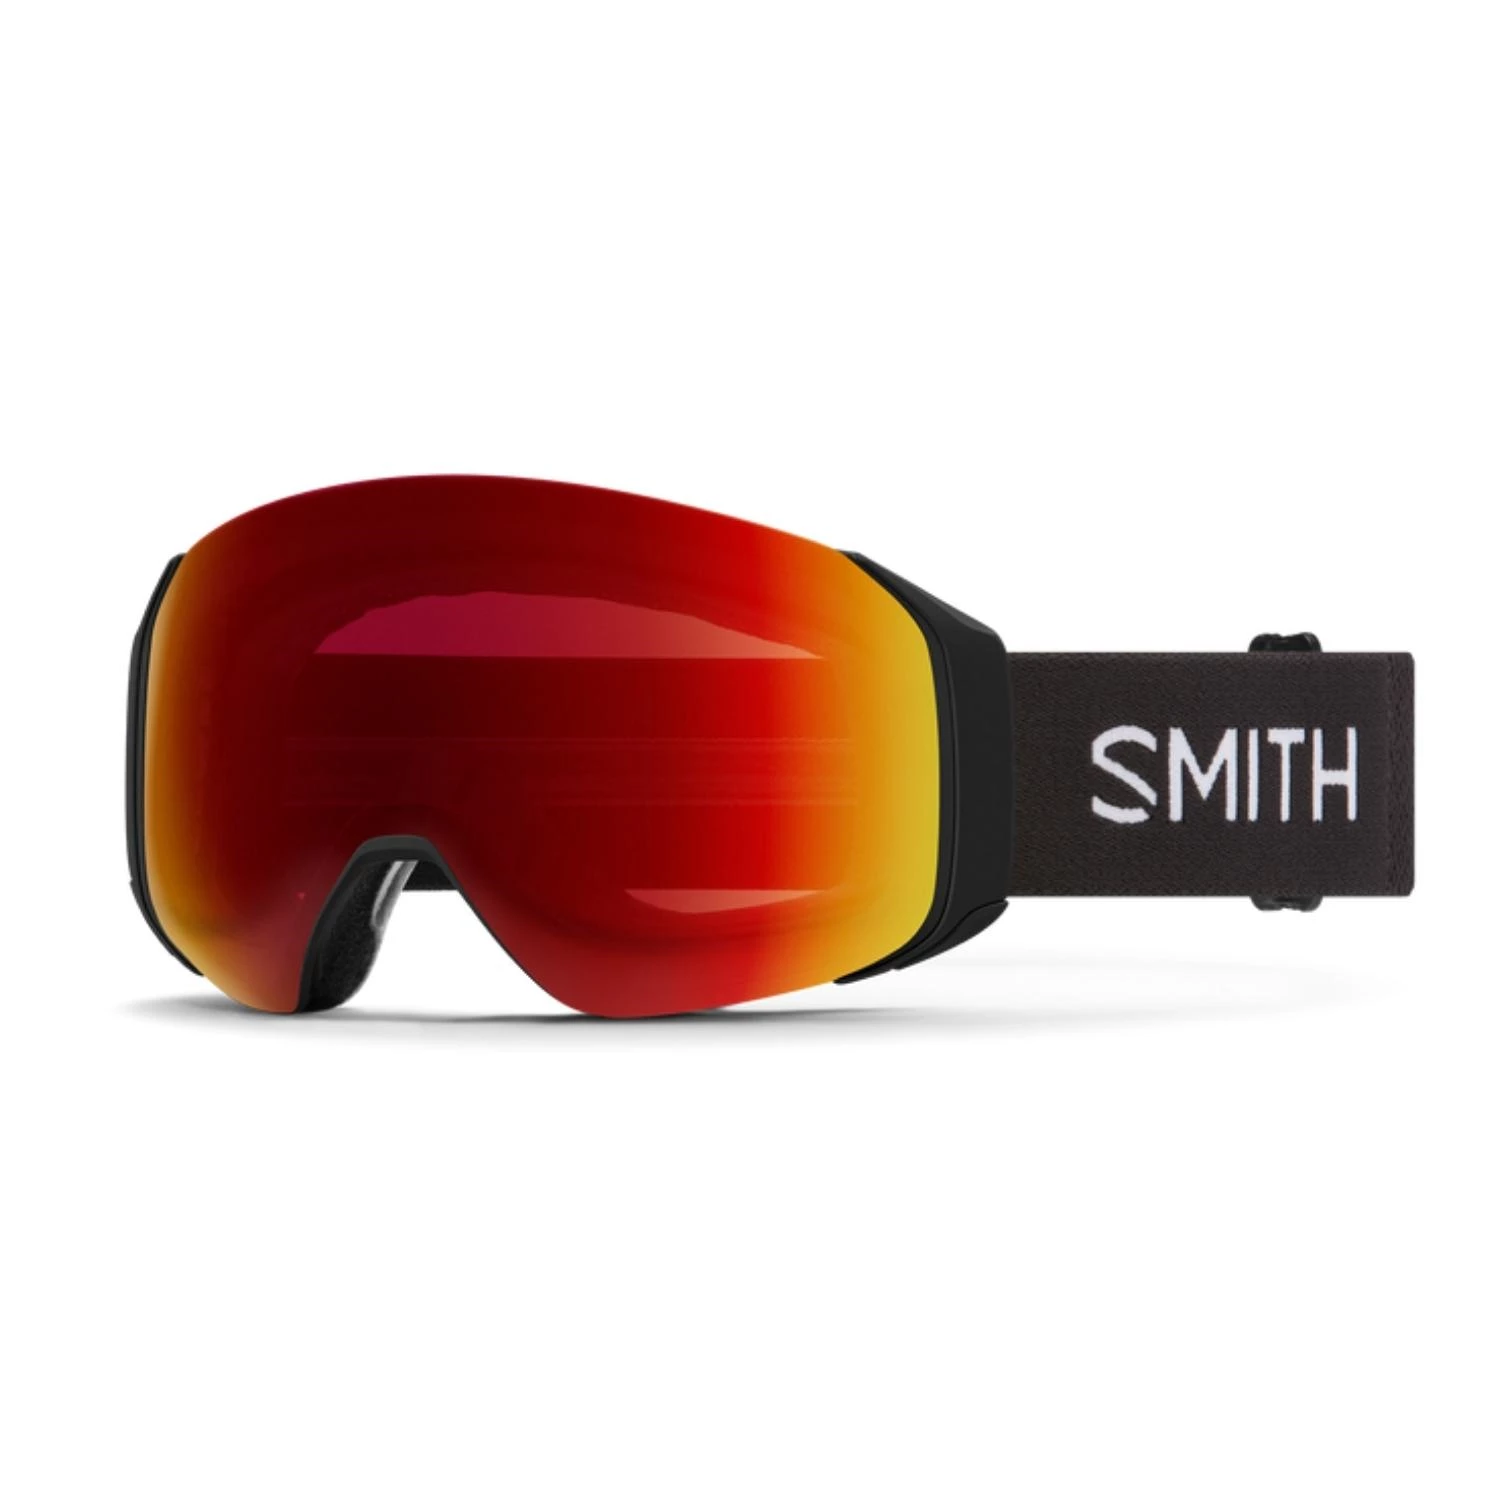 Smith 4D Mag S skibril